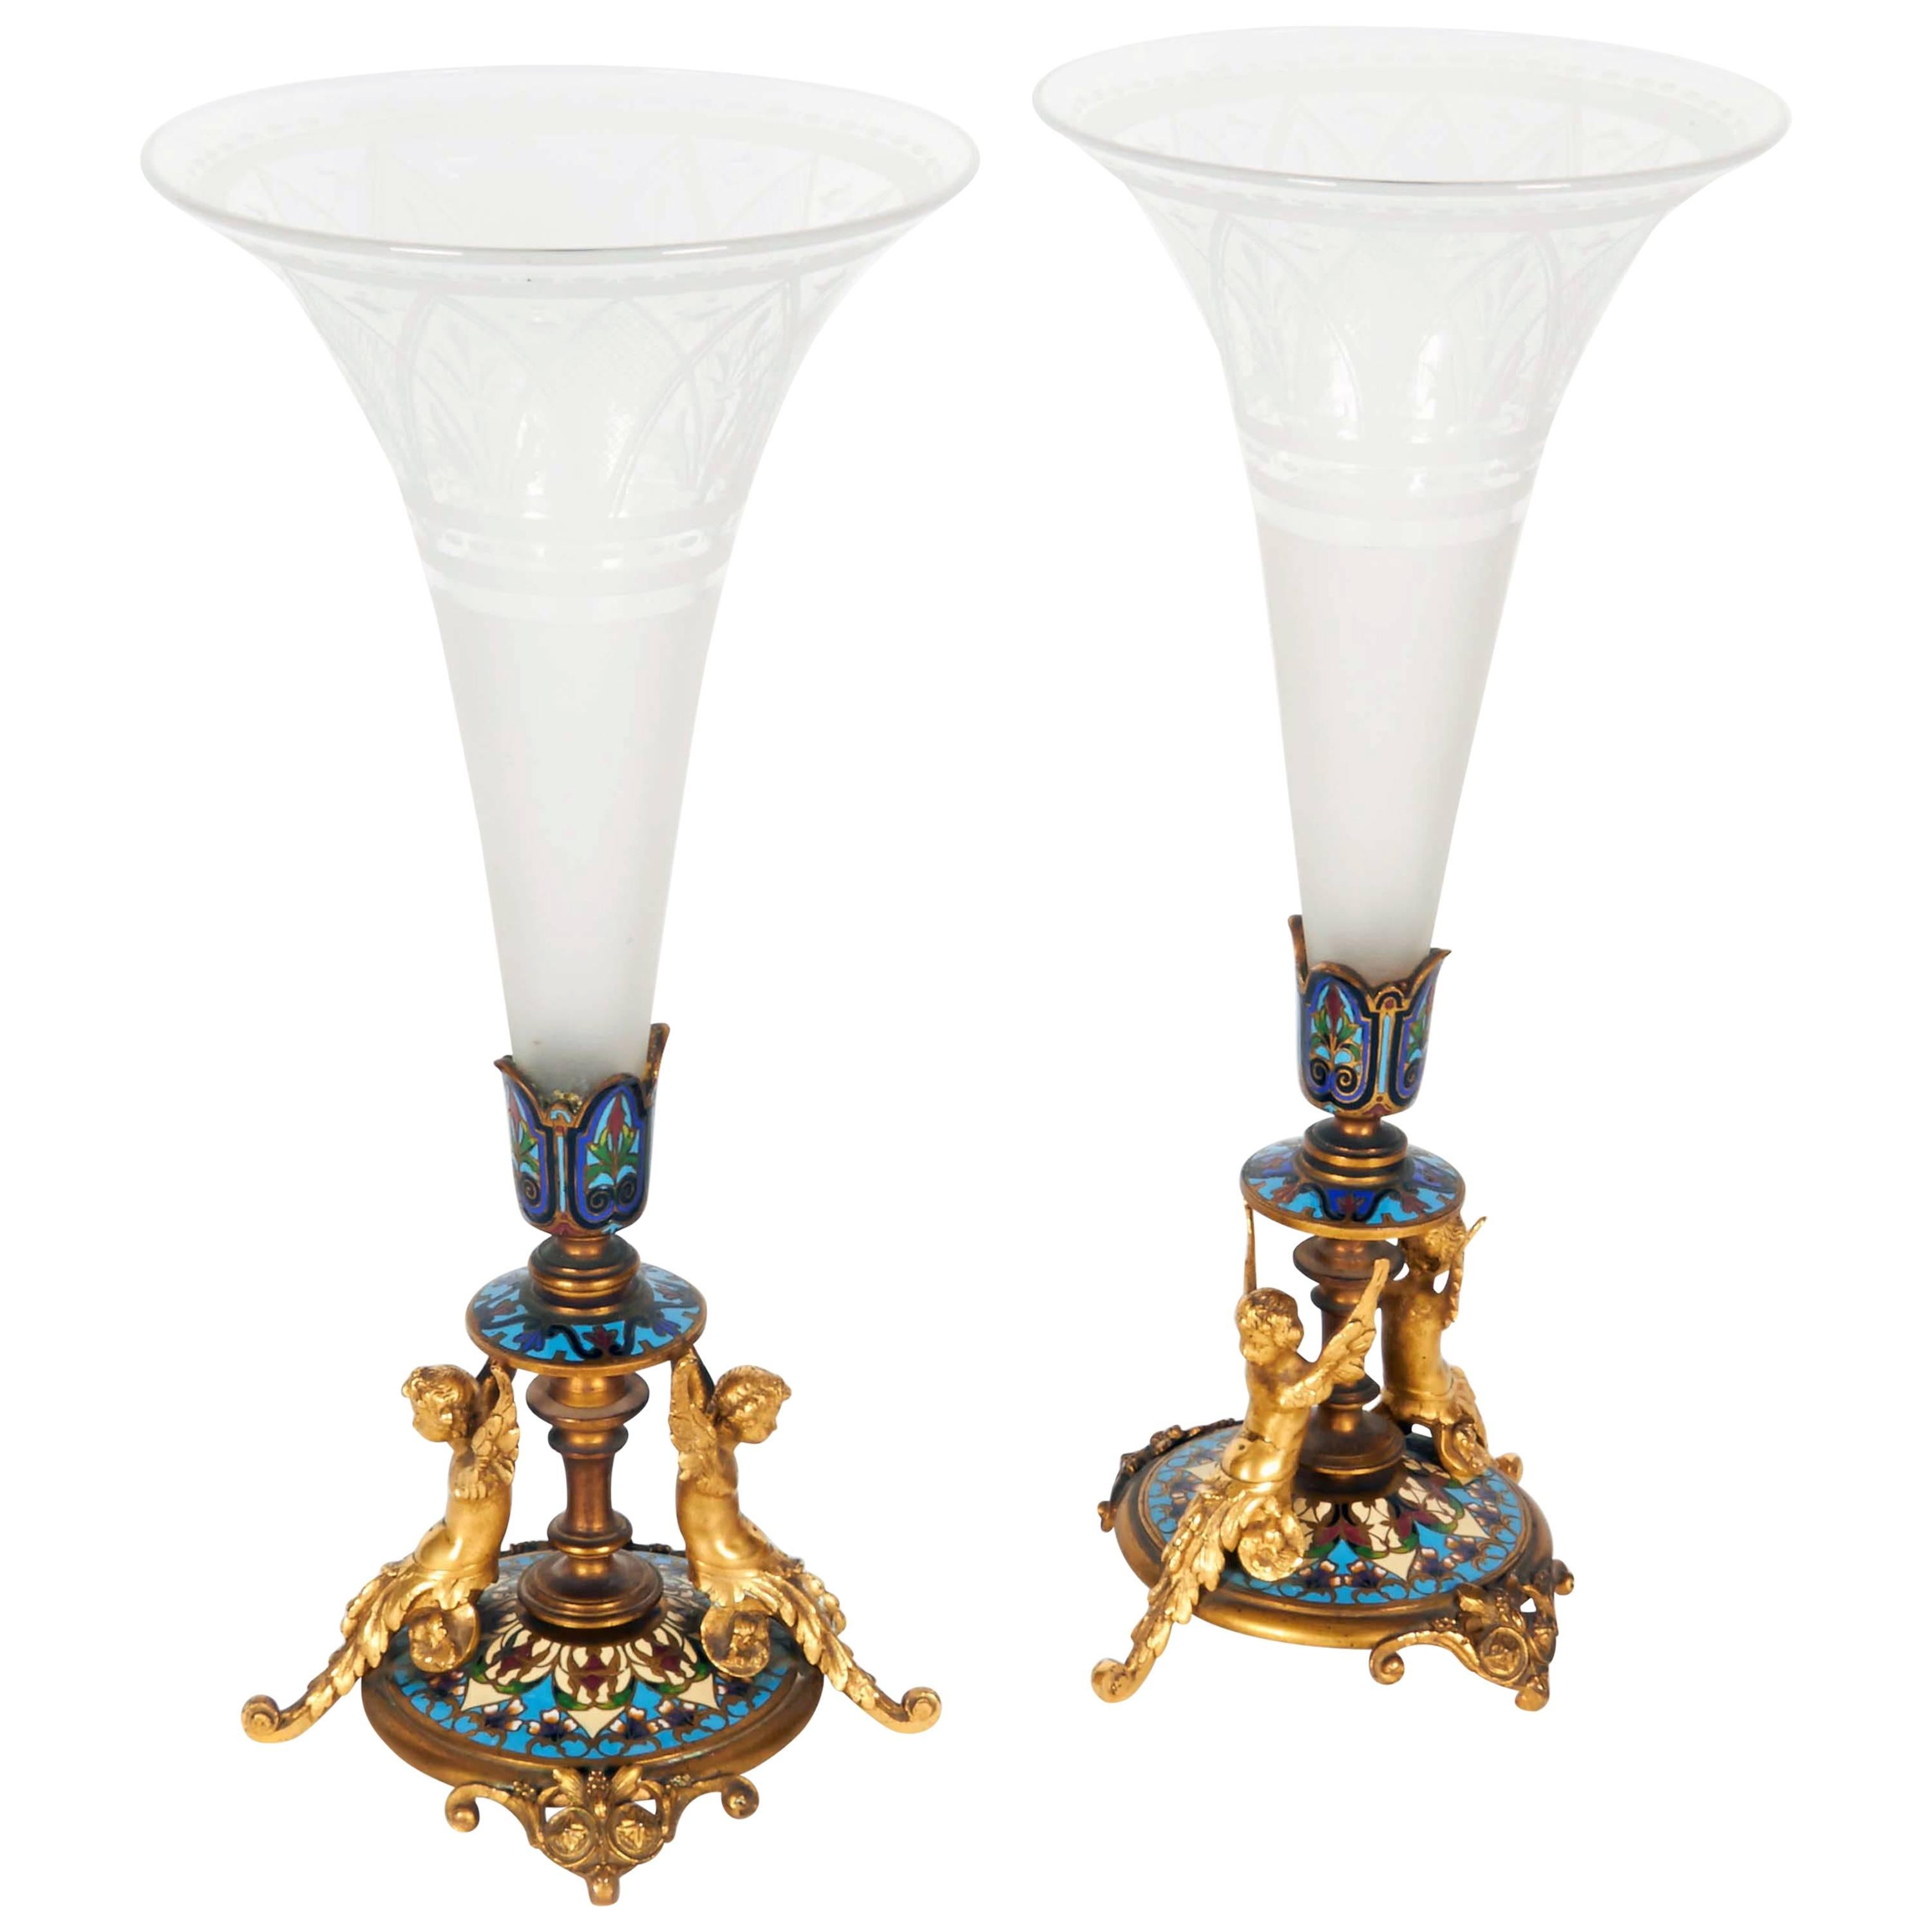 Pair of French Ormolu and Champleve Cloisonne Enamel Frosted Glass Trumpet Vases